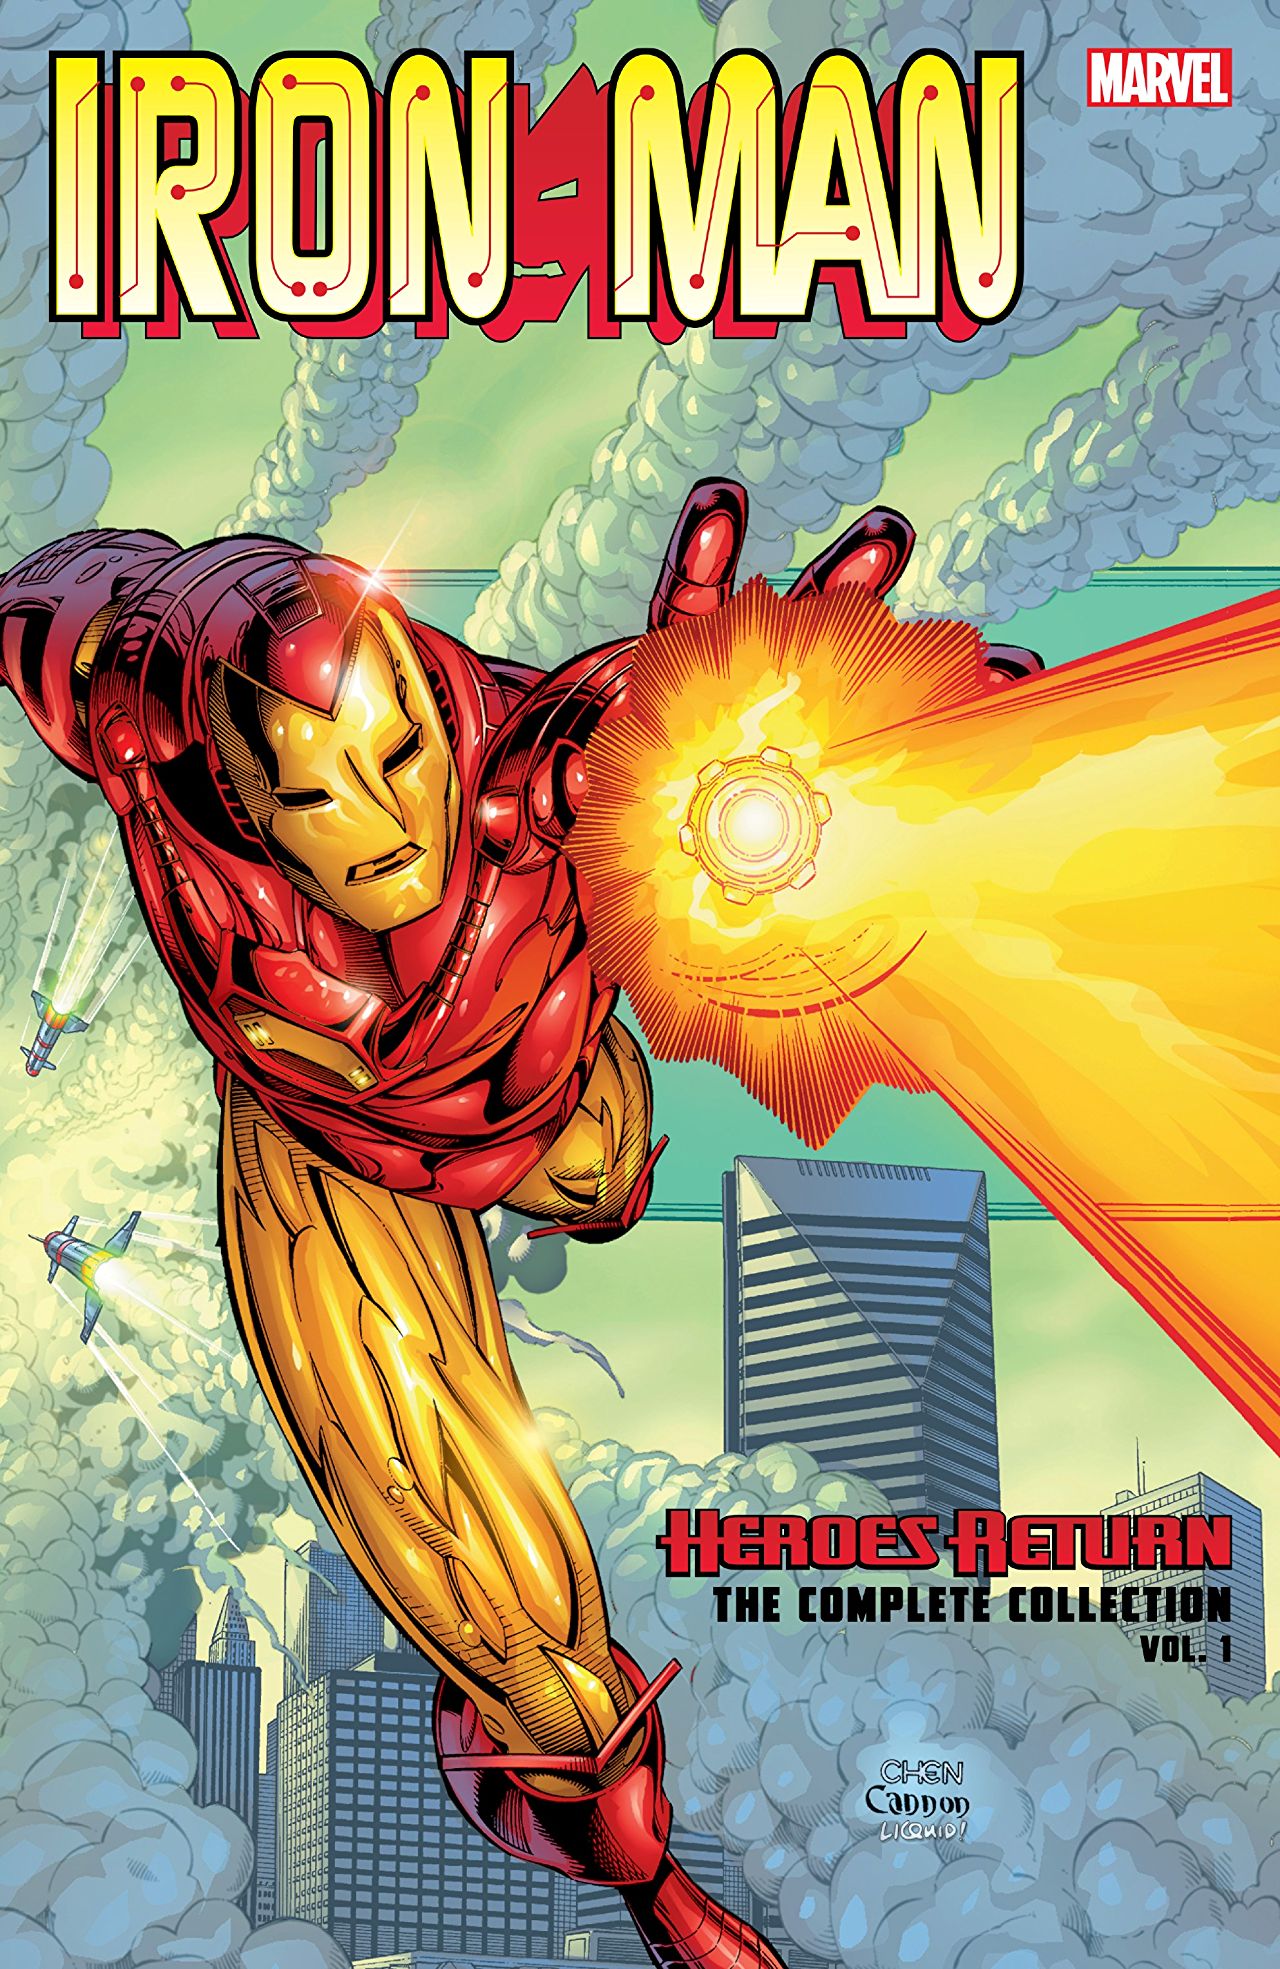 Iron Man: Heroes Return - The Complete Collection Vol. 1 (Trade Paperback)